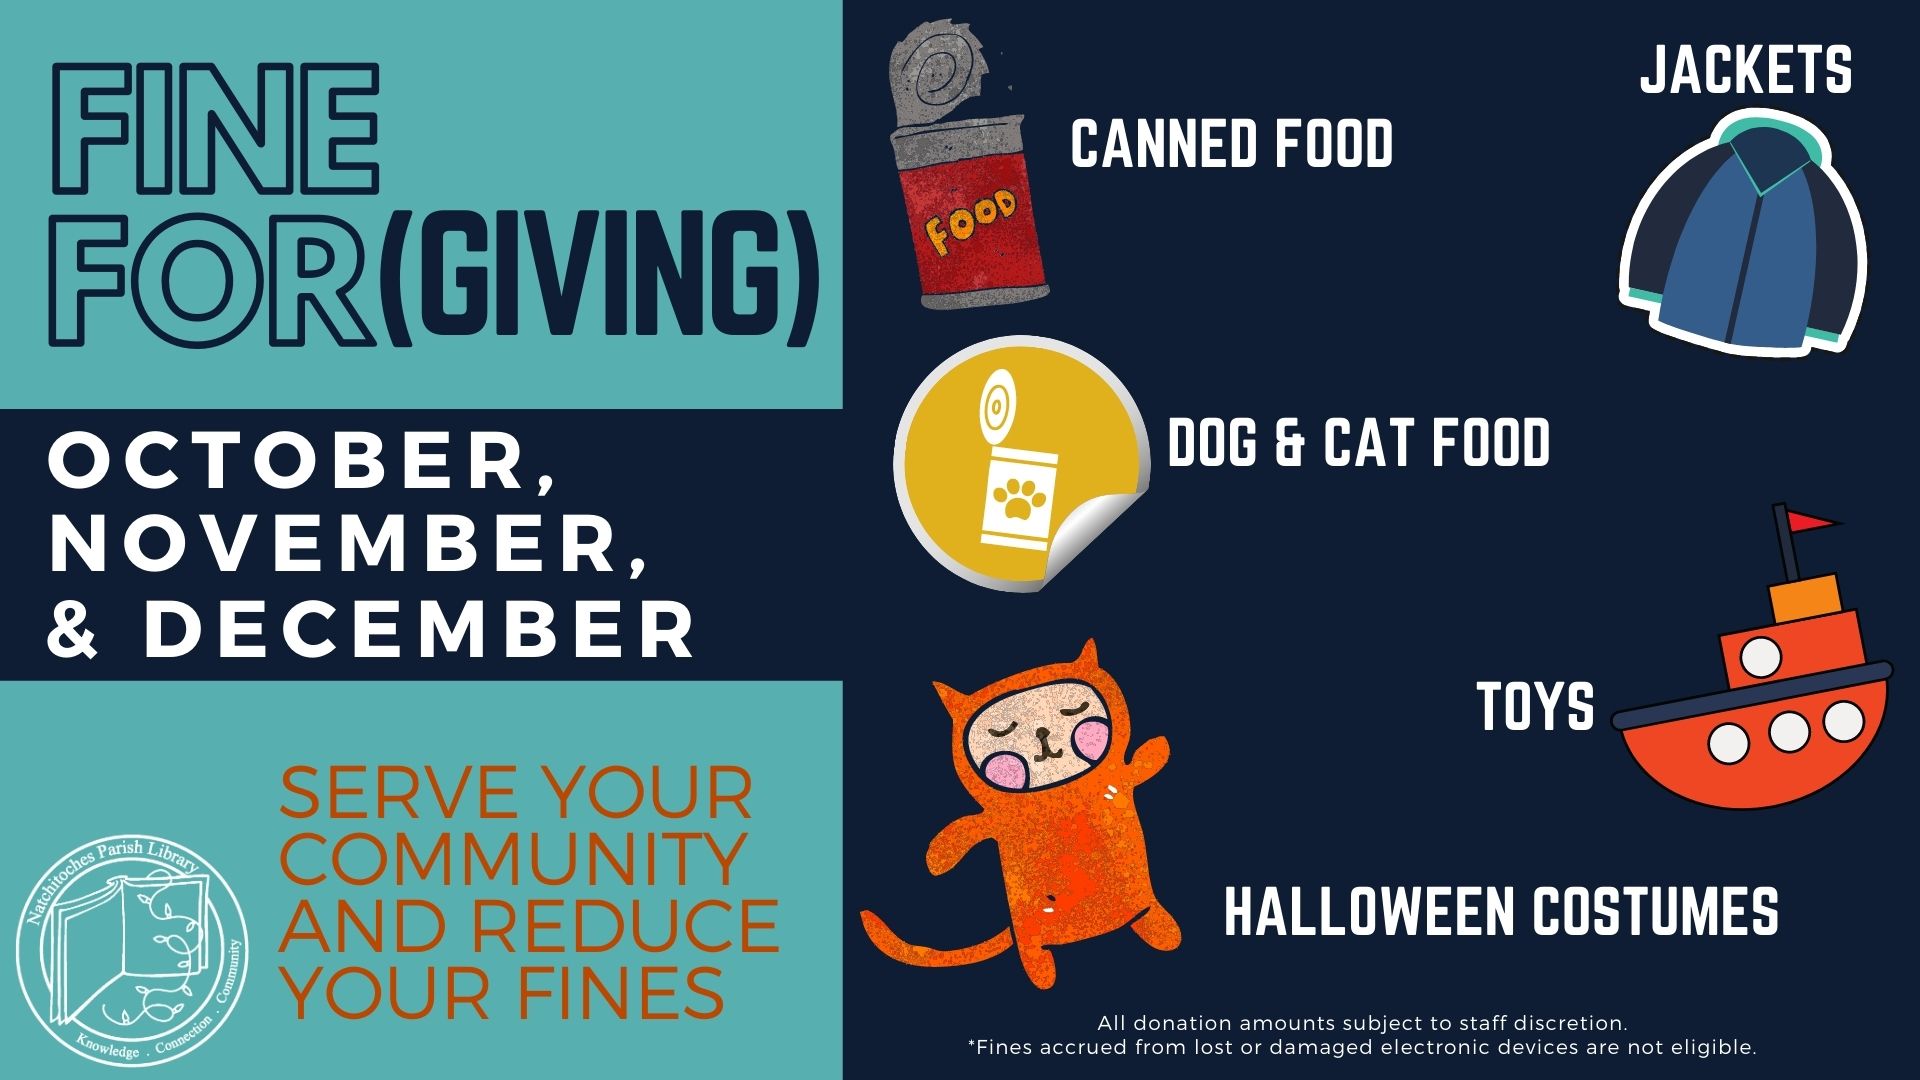 Fine ForGIVING fine reduction promo running through end of December. Donate toys, coats, costumes, cat and dog food, and canned food to reduce overdue fines. Details available at circ desks.